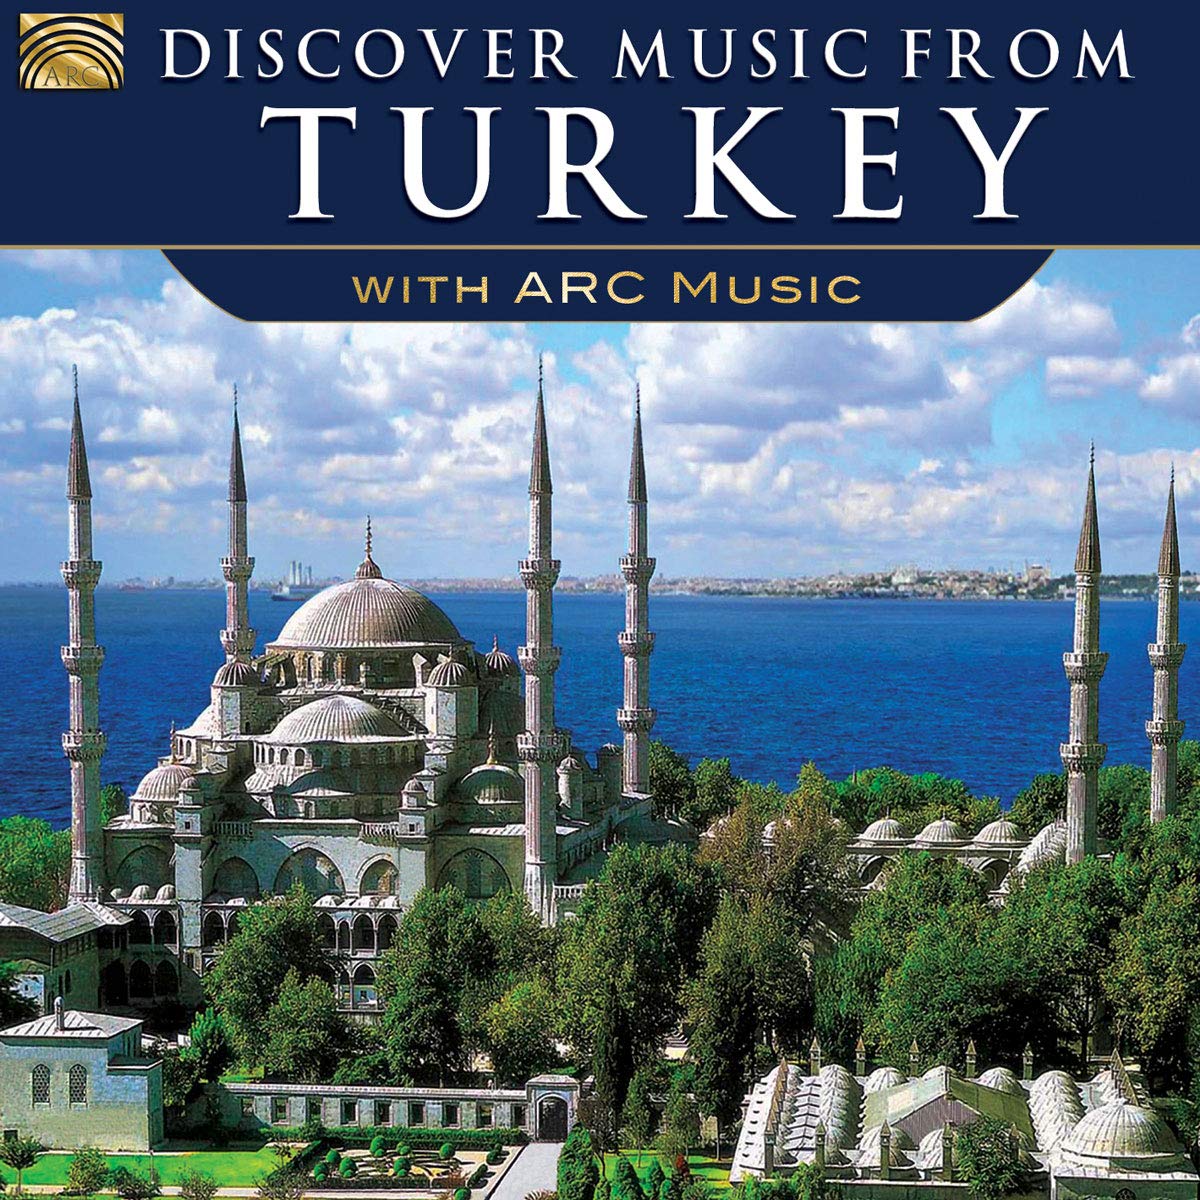 Discover Music From Turkey